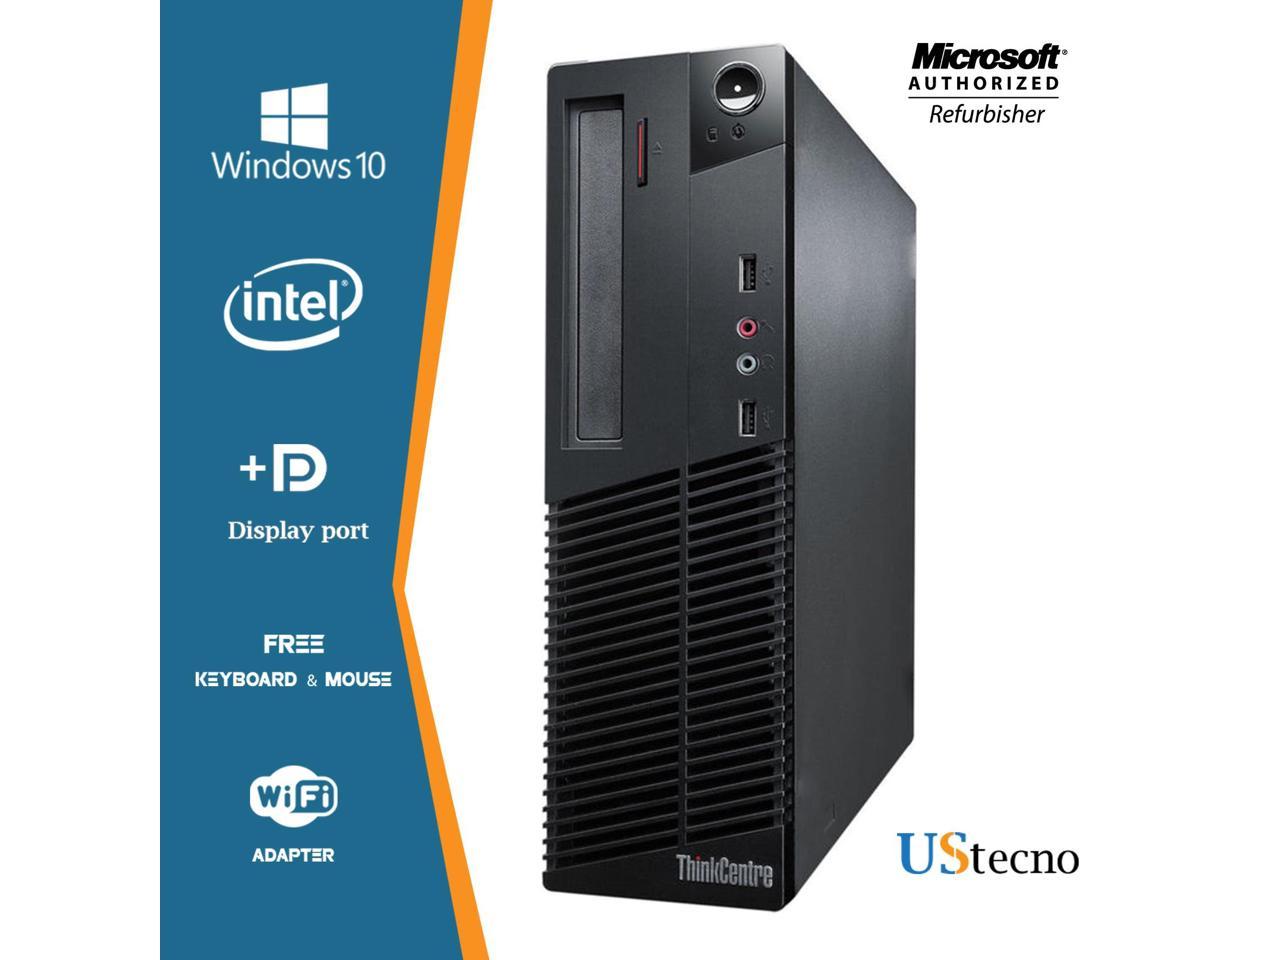 Lenovo ThinkCentre M92P SFF Computer Intel Core i7 3770 8GB 256GB SSD DVD Windows 10 Professional New Free Keyboard, Mouse,Power cord,WiFi Adapter